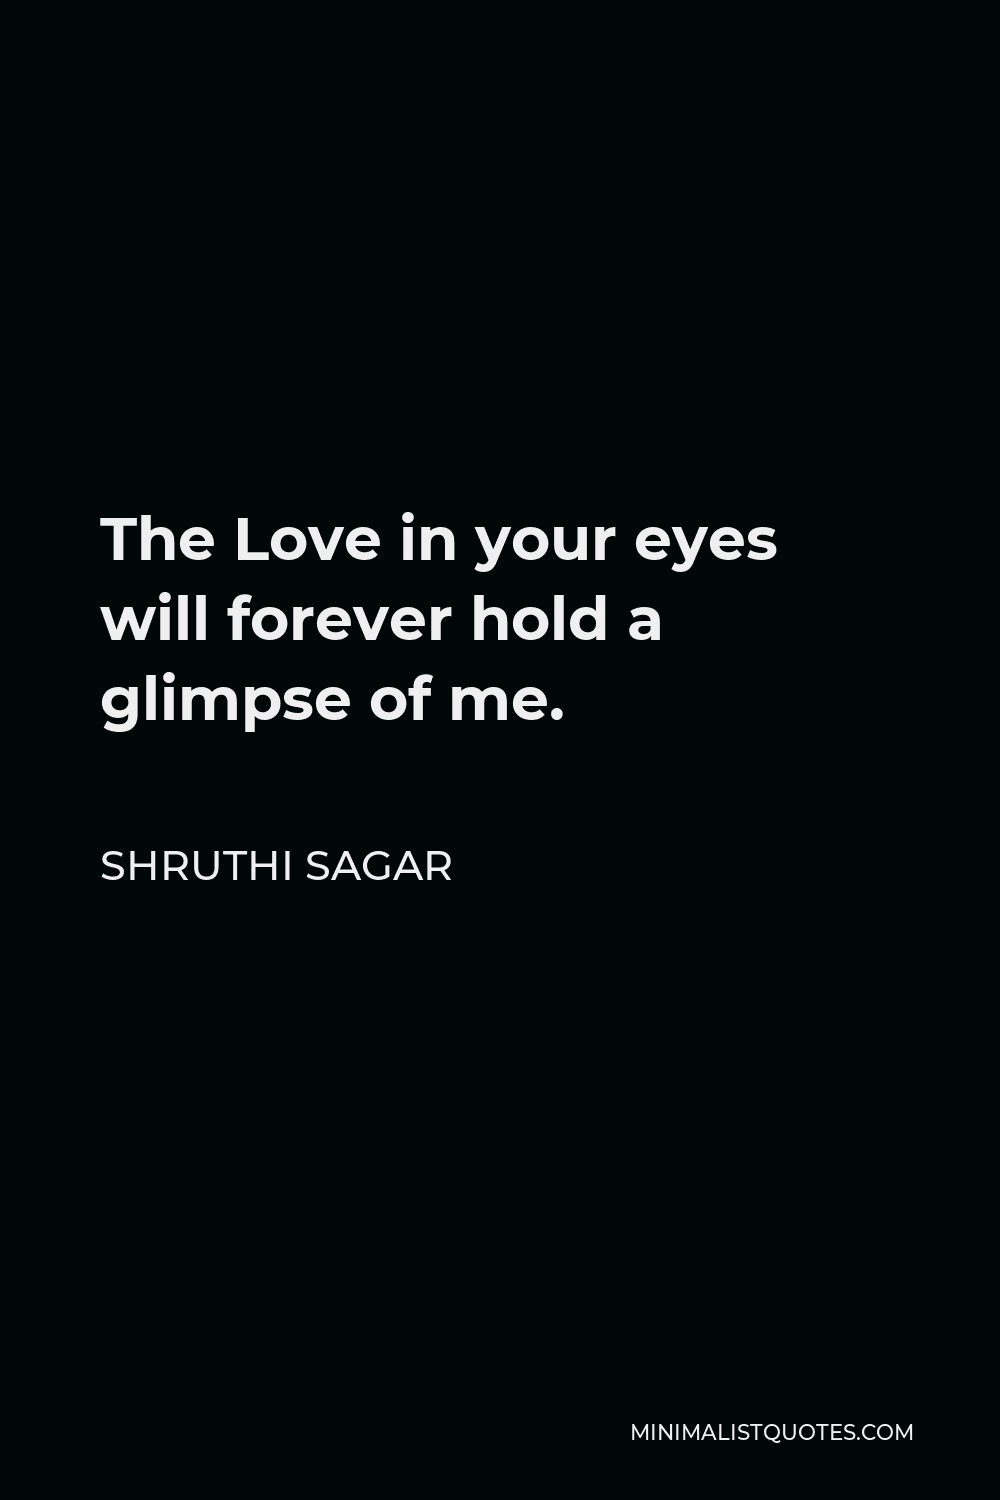 Shruthi Sagar Quote - The Love in your eyes will forever hold a glimpse of me.